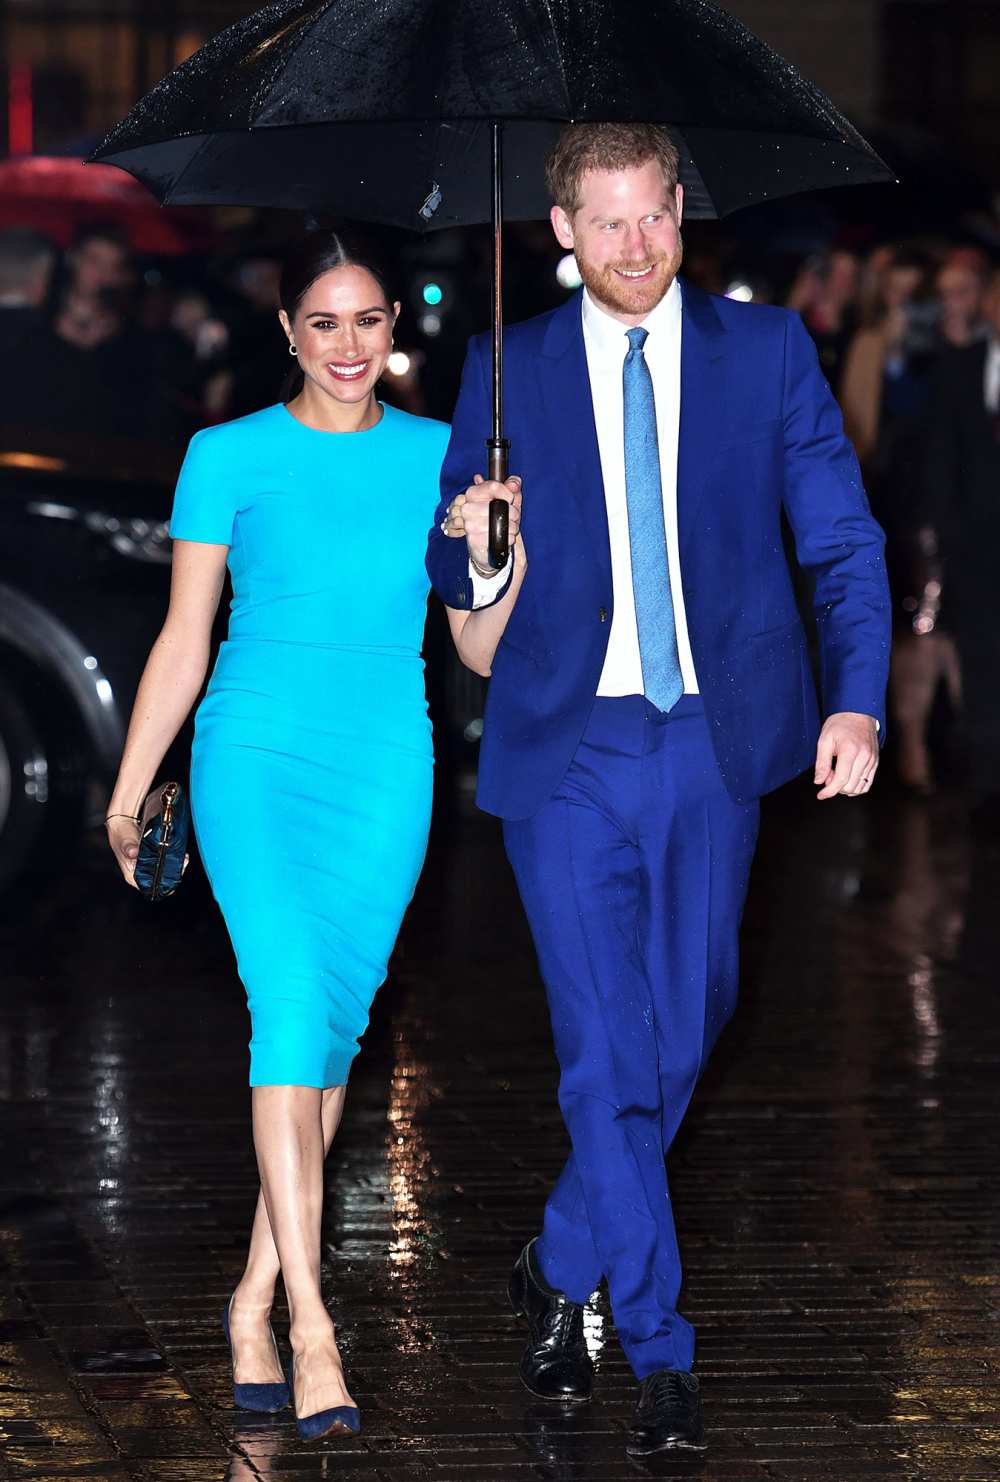 Meghan Markle and Prince Harry attend Endeavour Fund Awards after Royal Exit